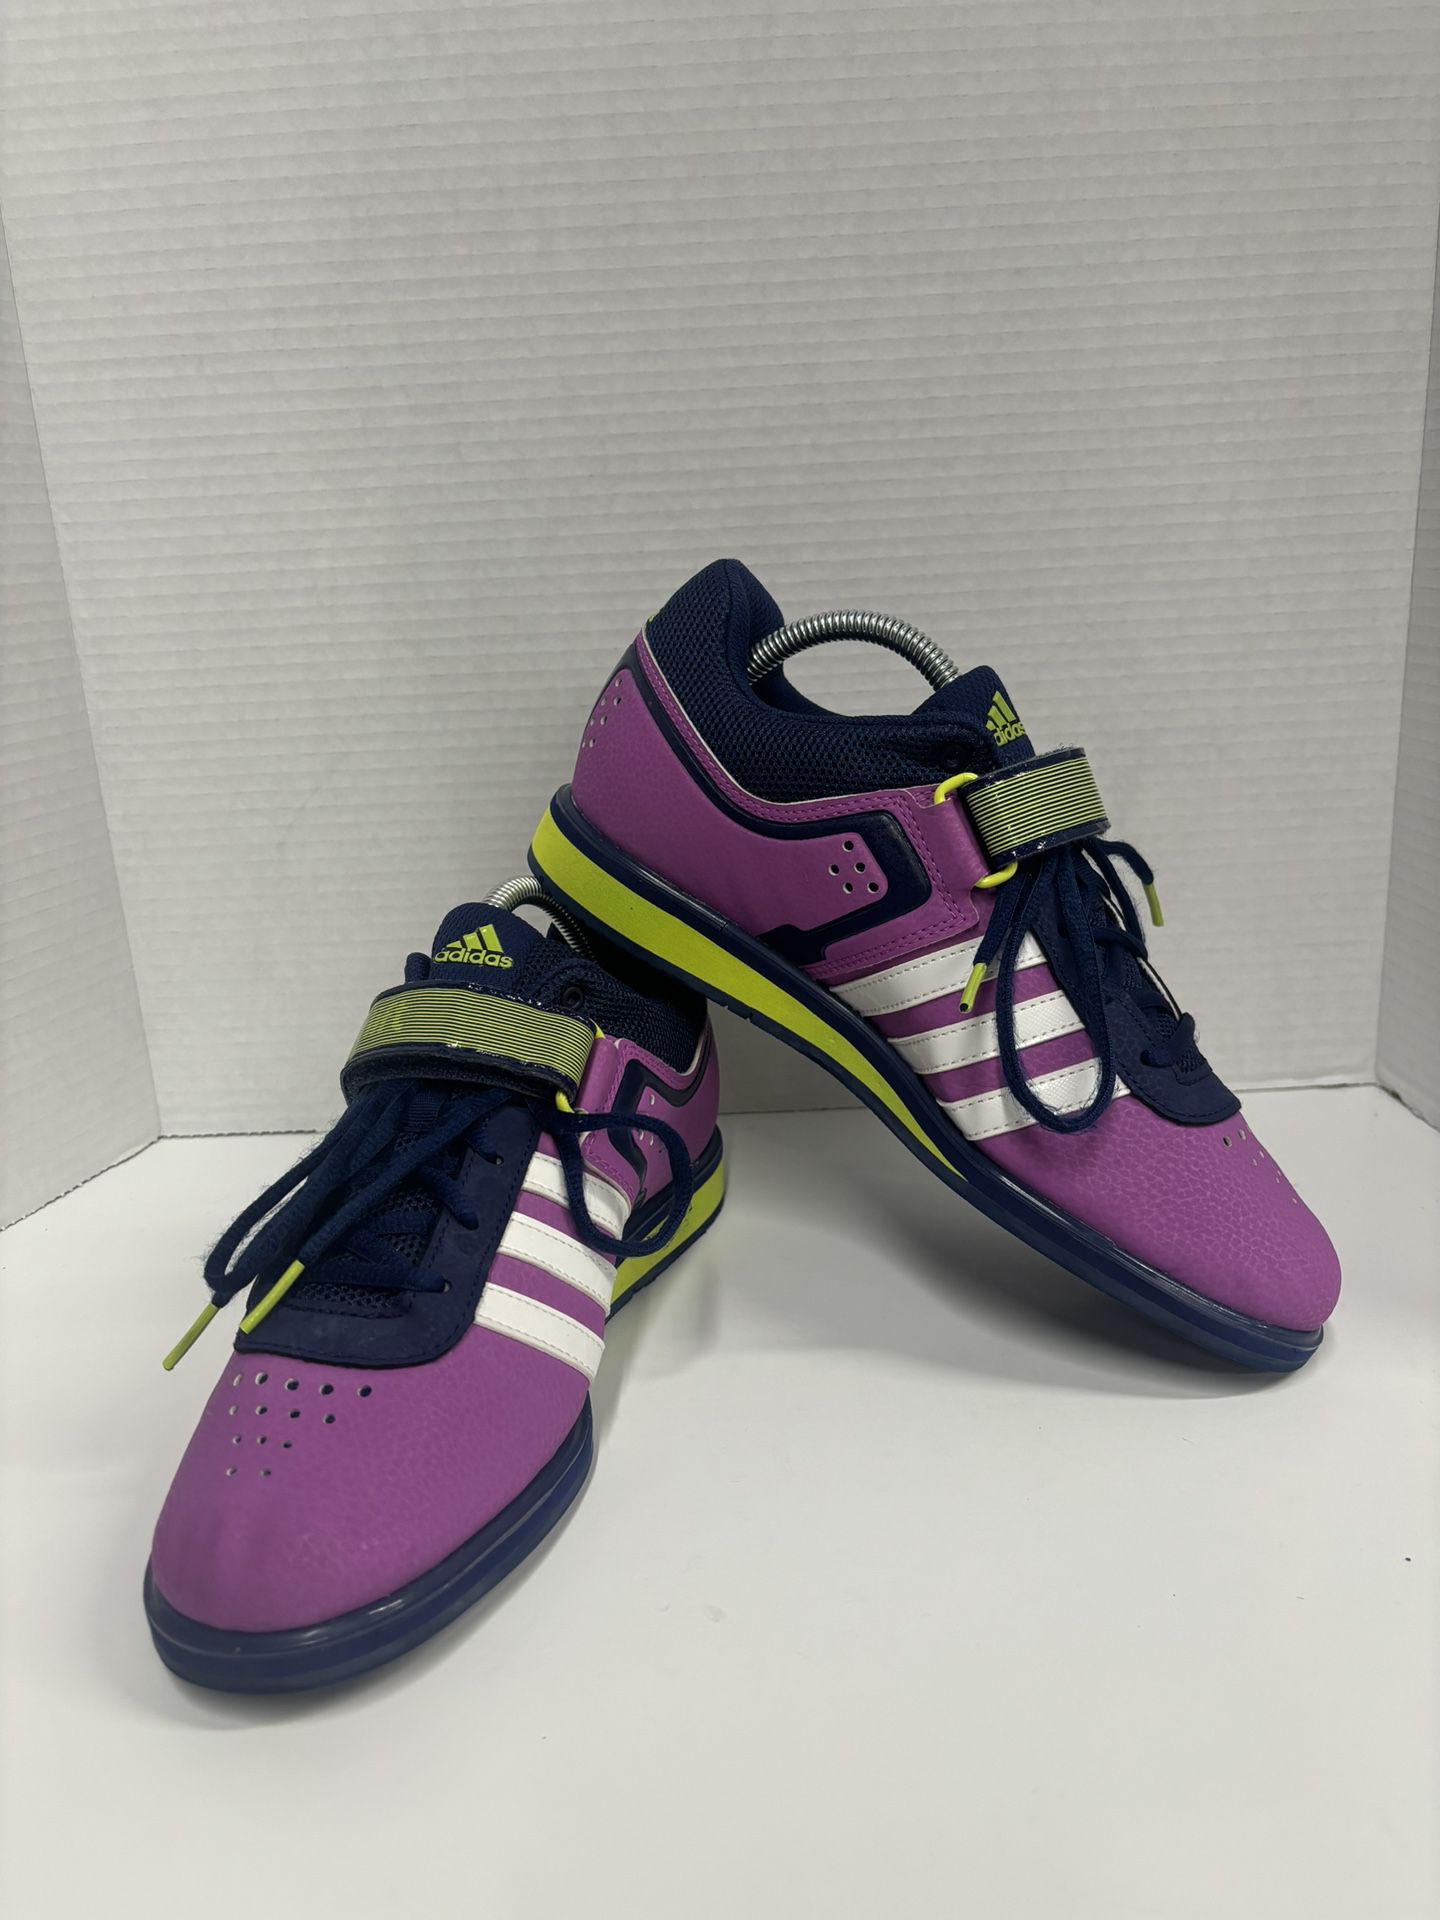 Adidas Powerlift 2.0 Weightlifting Shoes B39860 Women’s Size 8.5 Flash Pink